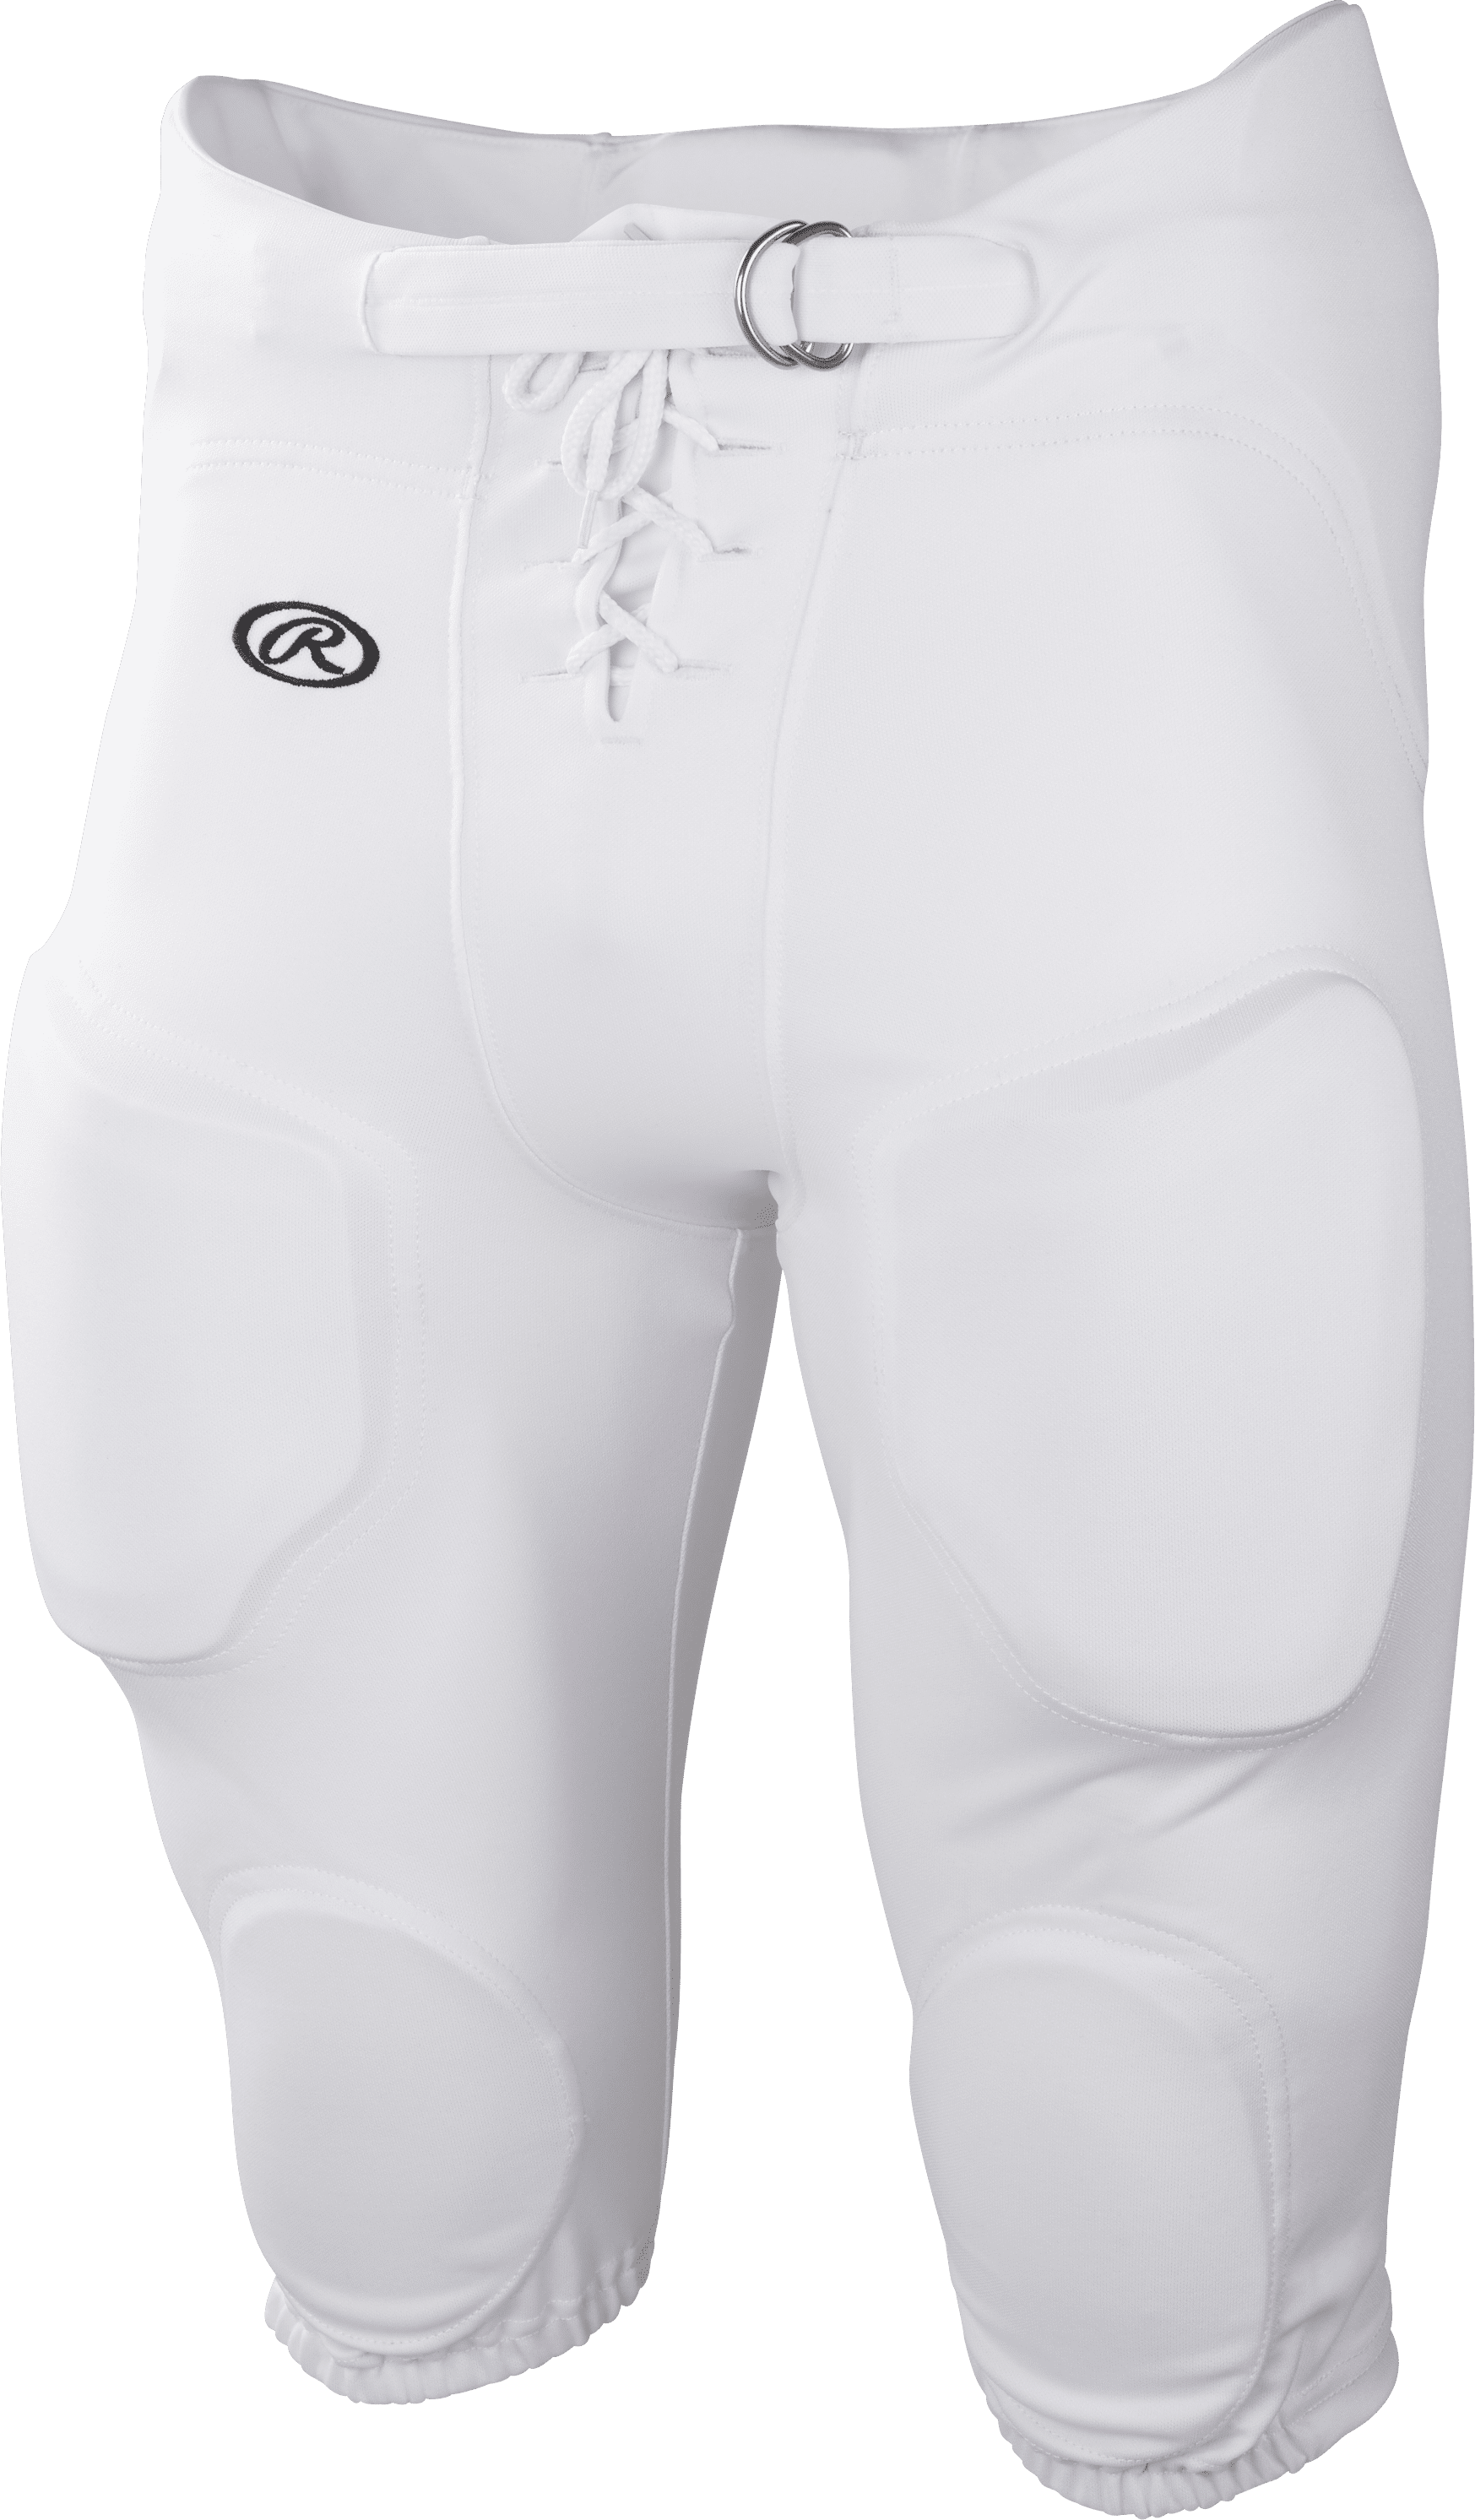 Rawlings Youth Integrated Football Pants White F1500P Various Sizes 